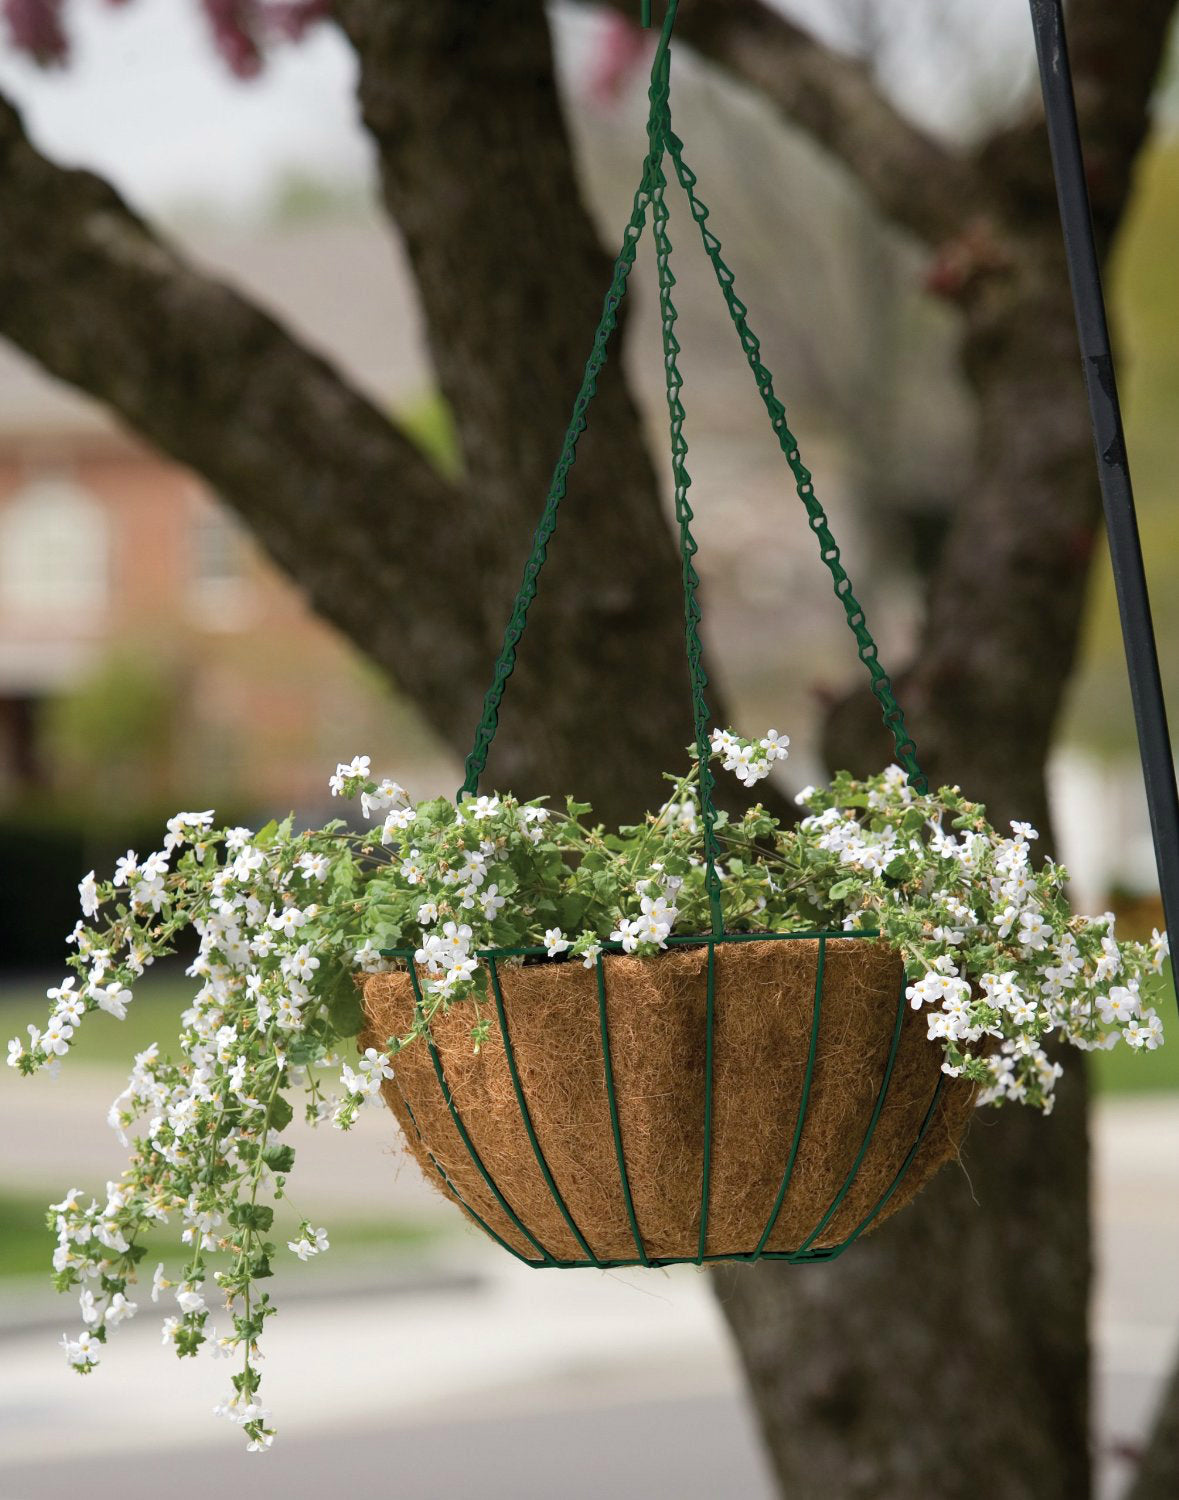 buy hanging planters & pots at cheap rate in bulk. wholesale & retail landscape edging & fencing store.